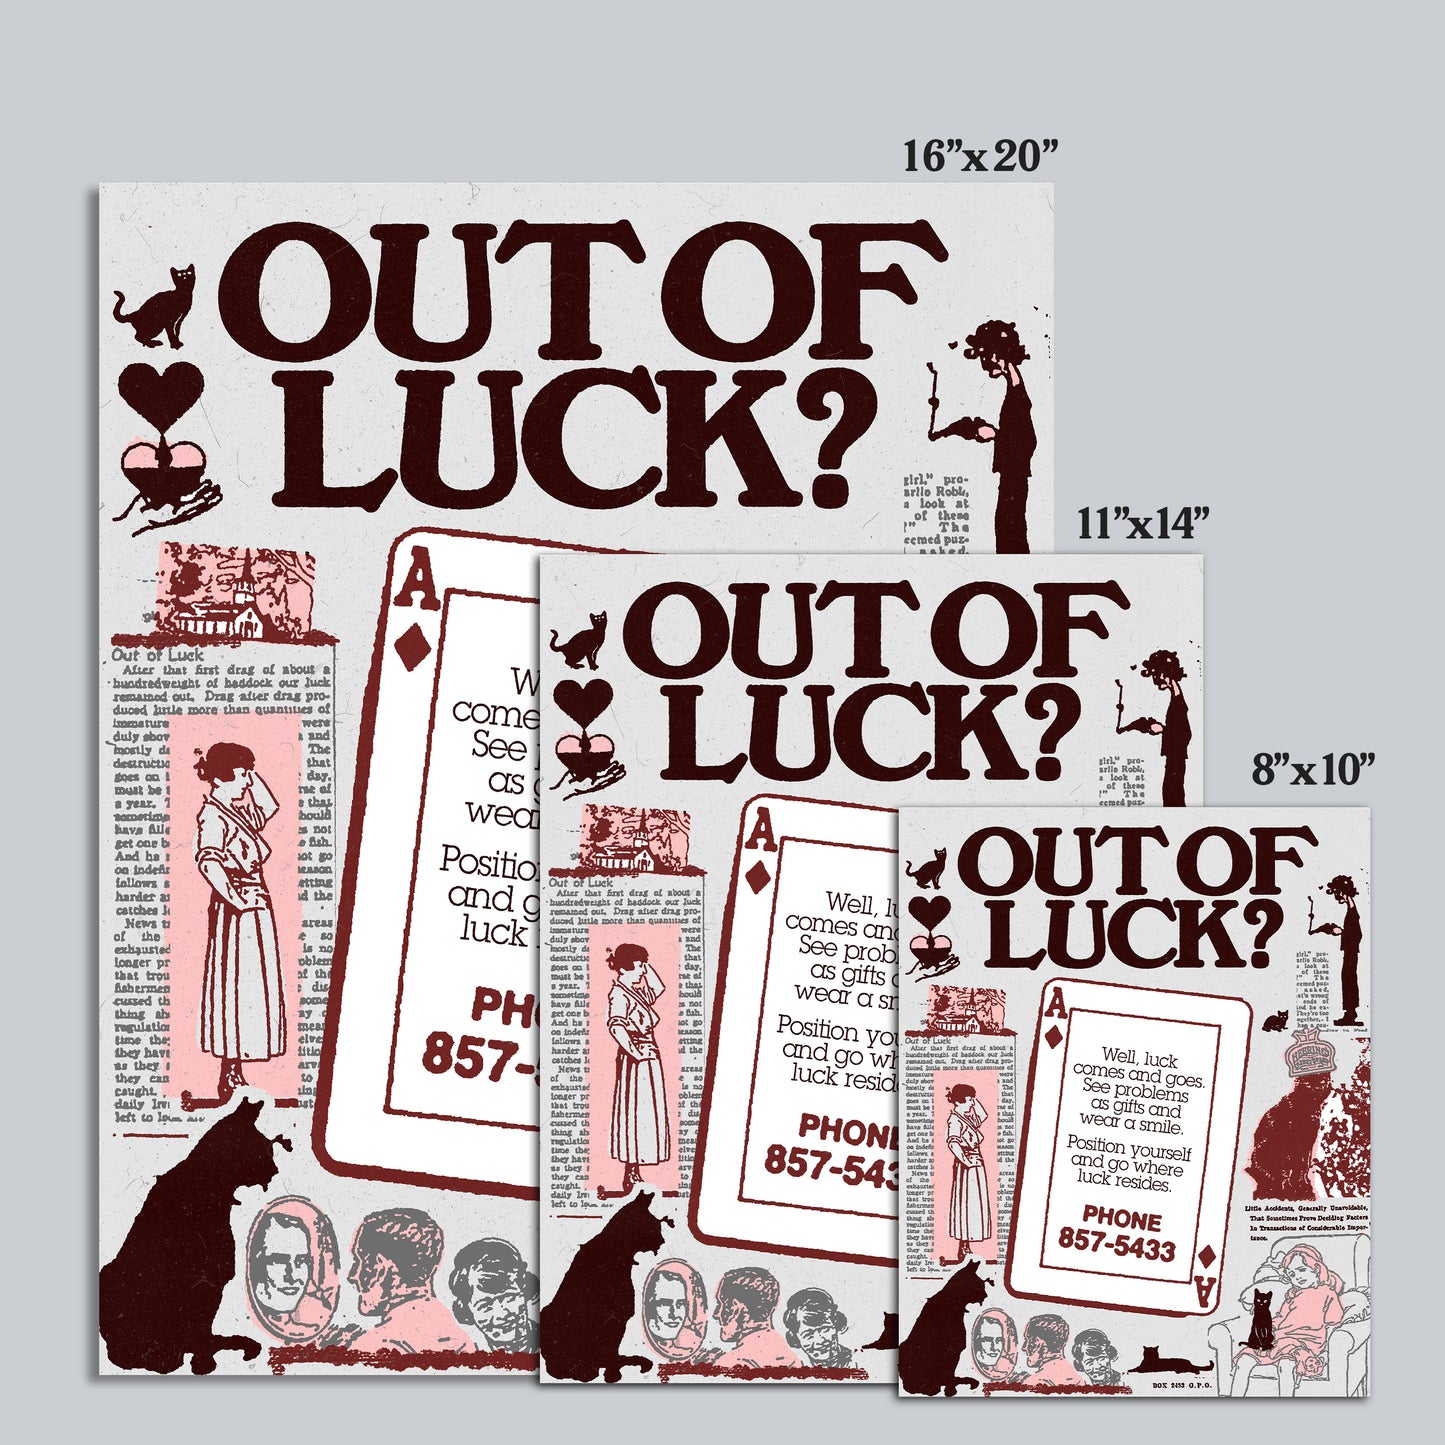 010 - Out of Luck?